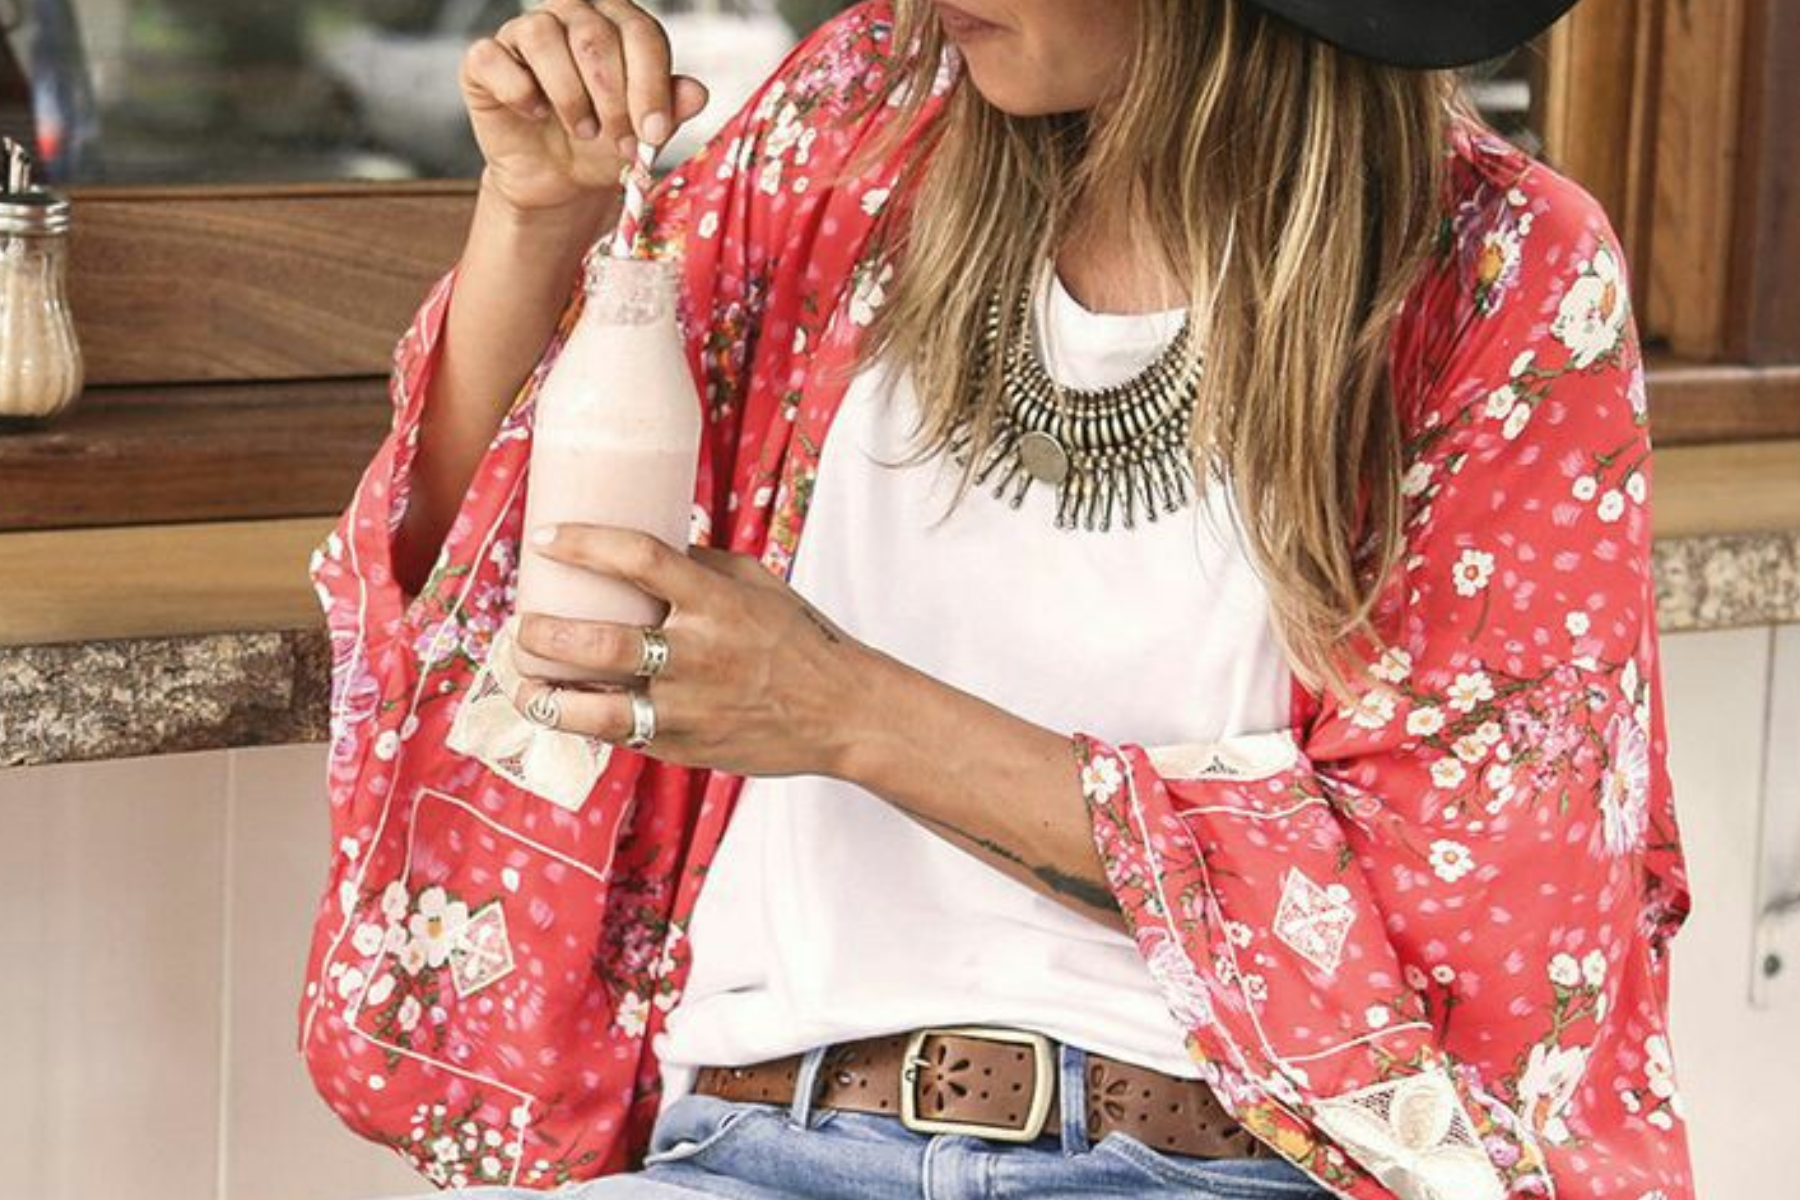 A woman drinking while wearing vintage bohemian jewelry